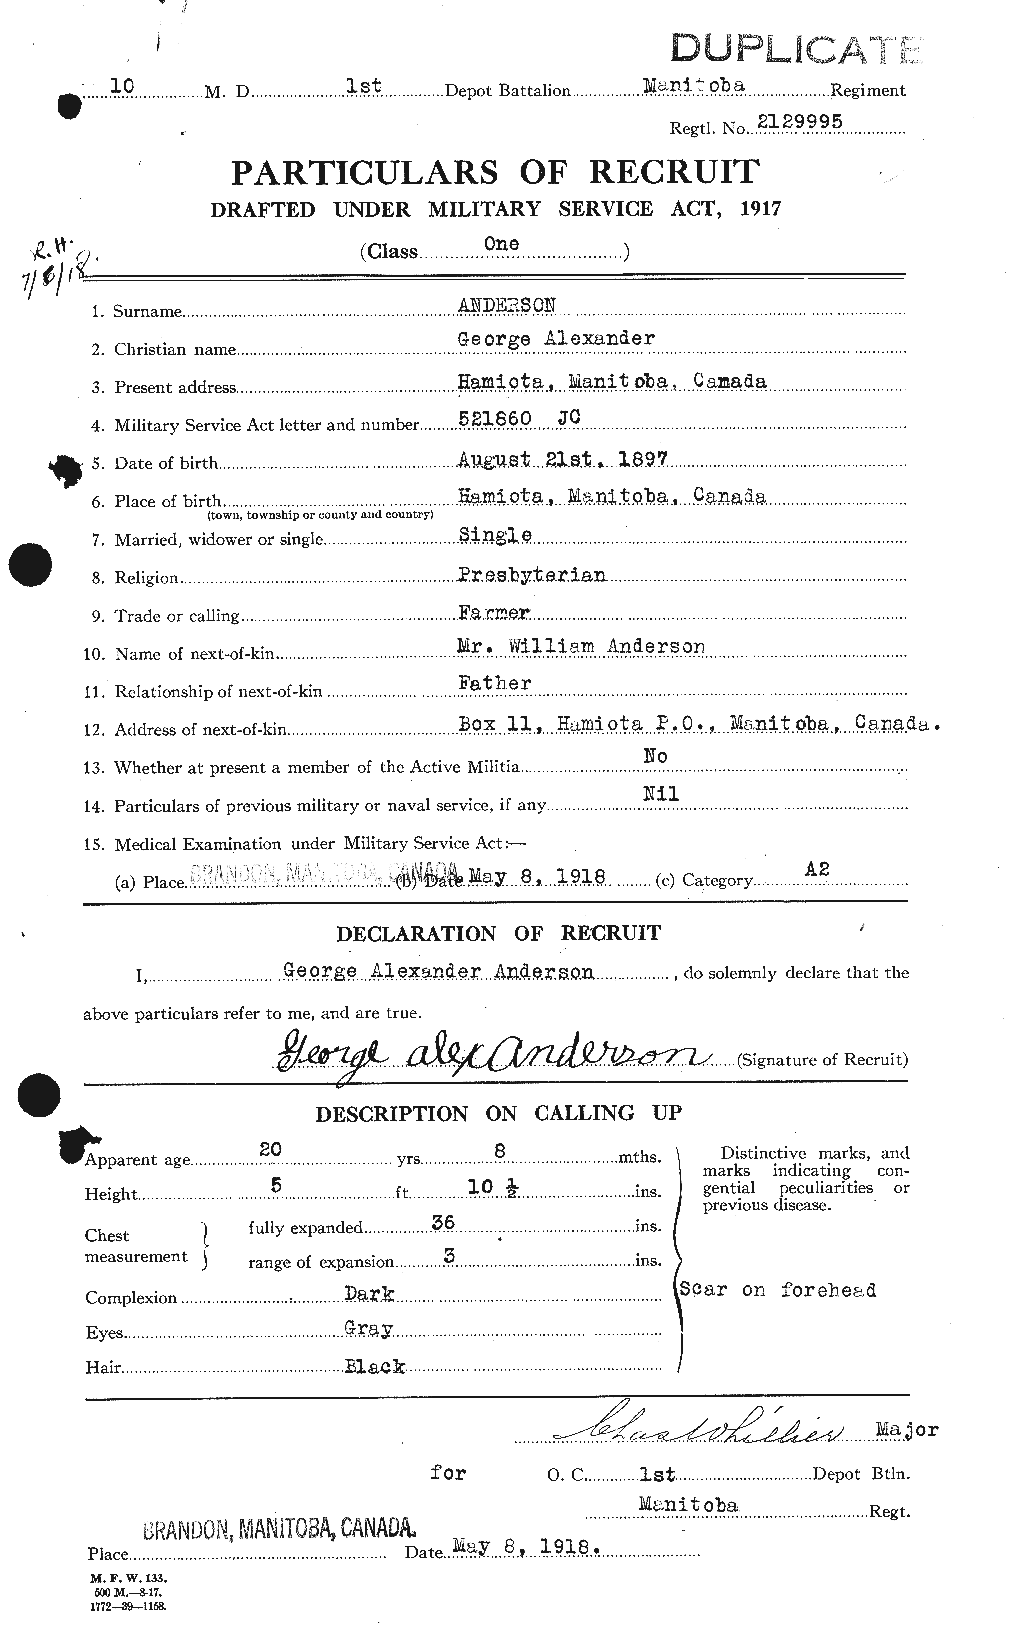 Personnel Records of the First World War - CEF 209740a